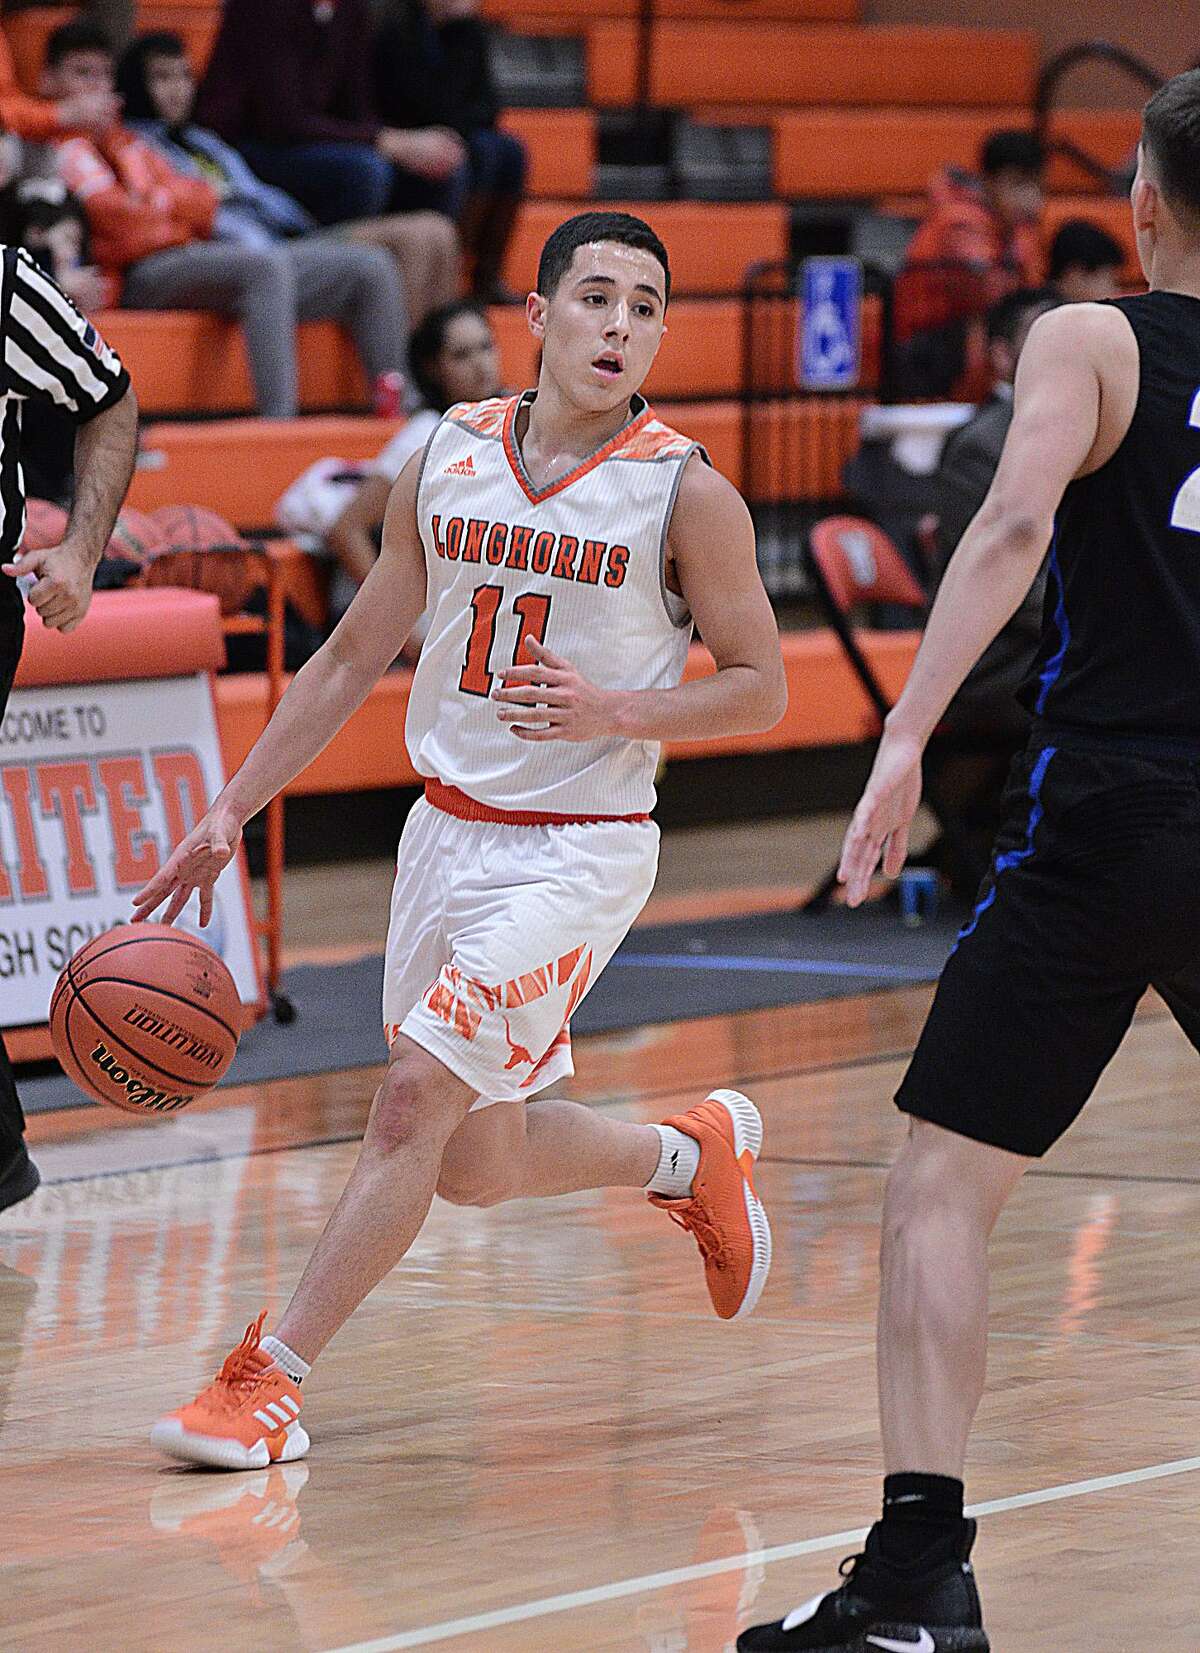 Alex Idrogo had a game-high five assists Tuesday along with 13 points and three steals in United’s 63-53 win over Edinburg Vela.